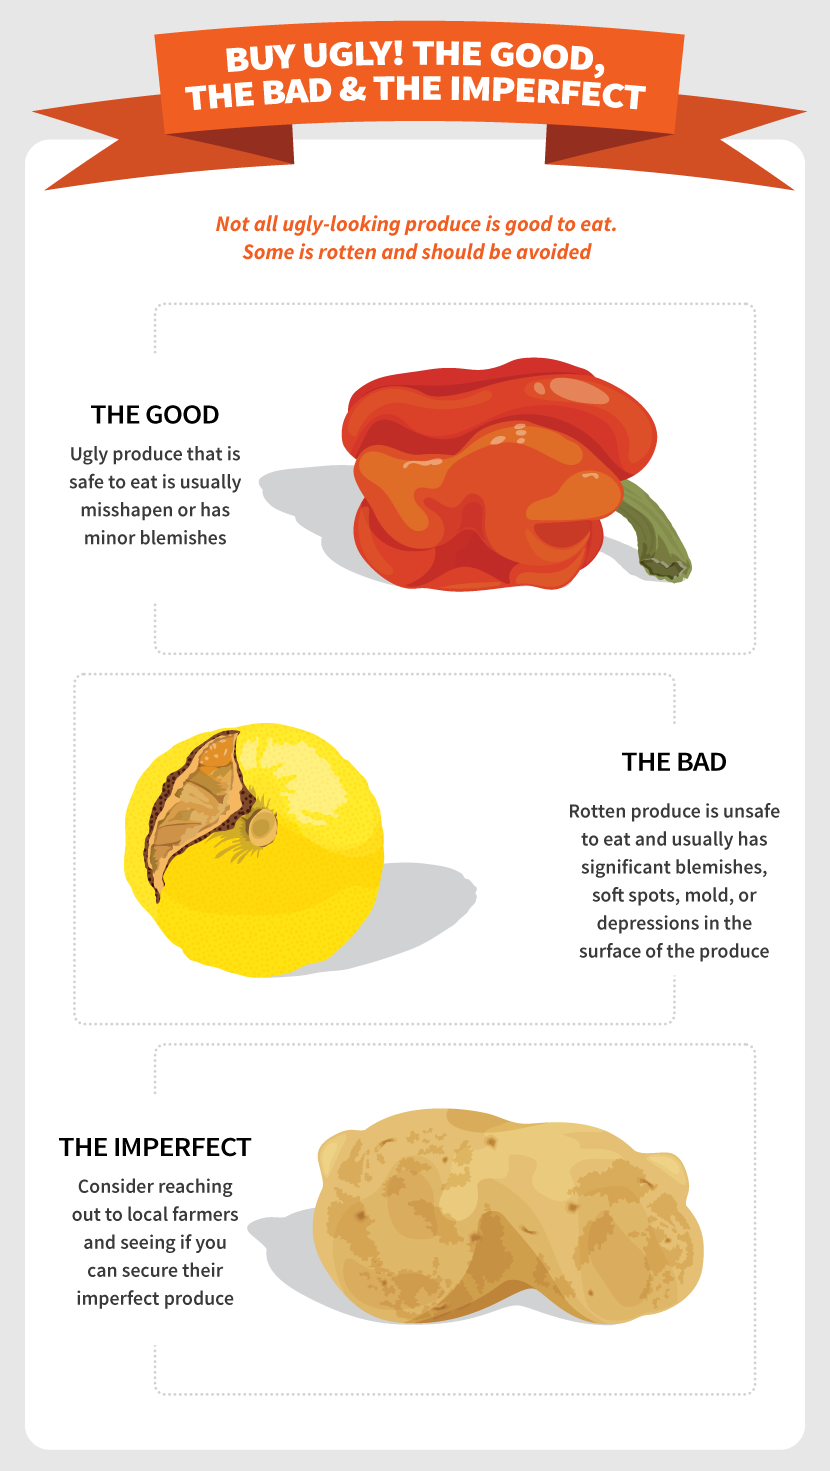 Buy Ugly! Buy the Good, the Bad, & the Imperfect - ‘Ugly Produce’: The Solution to Food Waste?